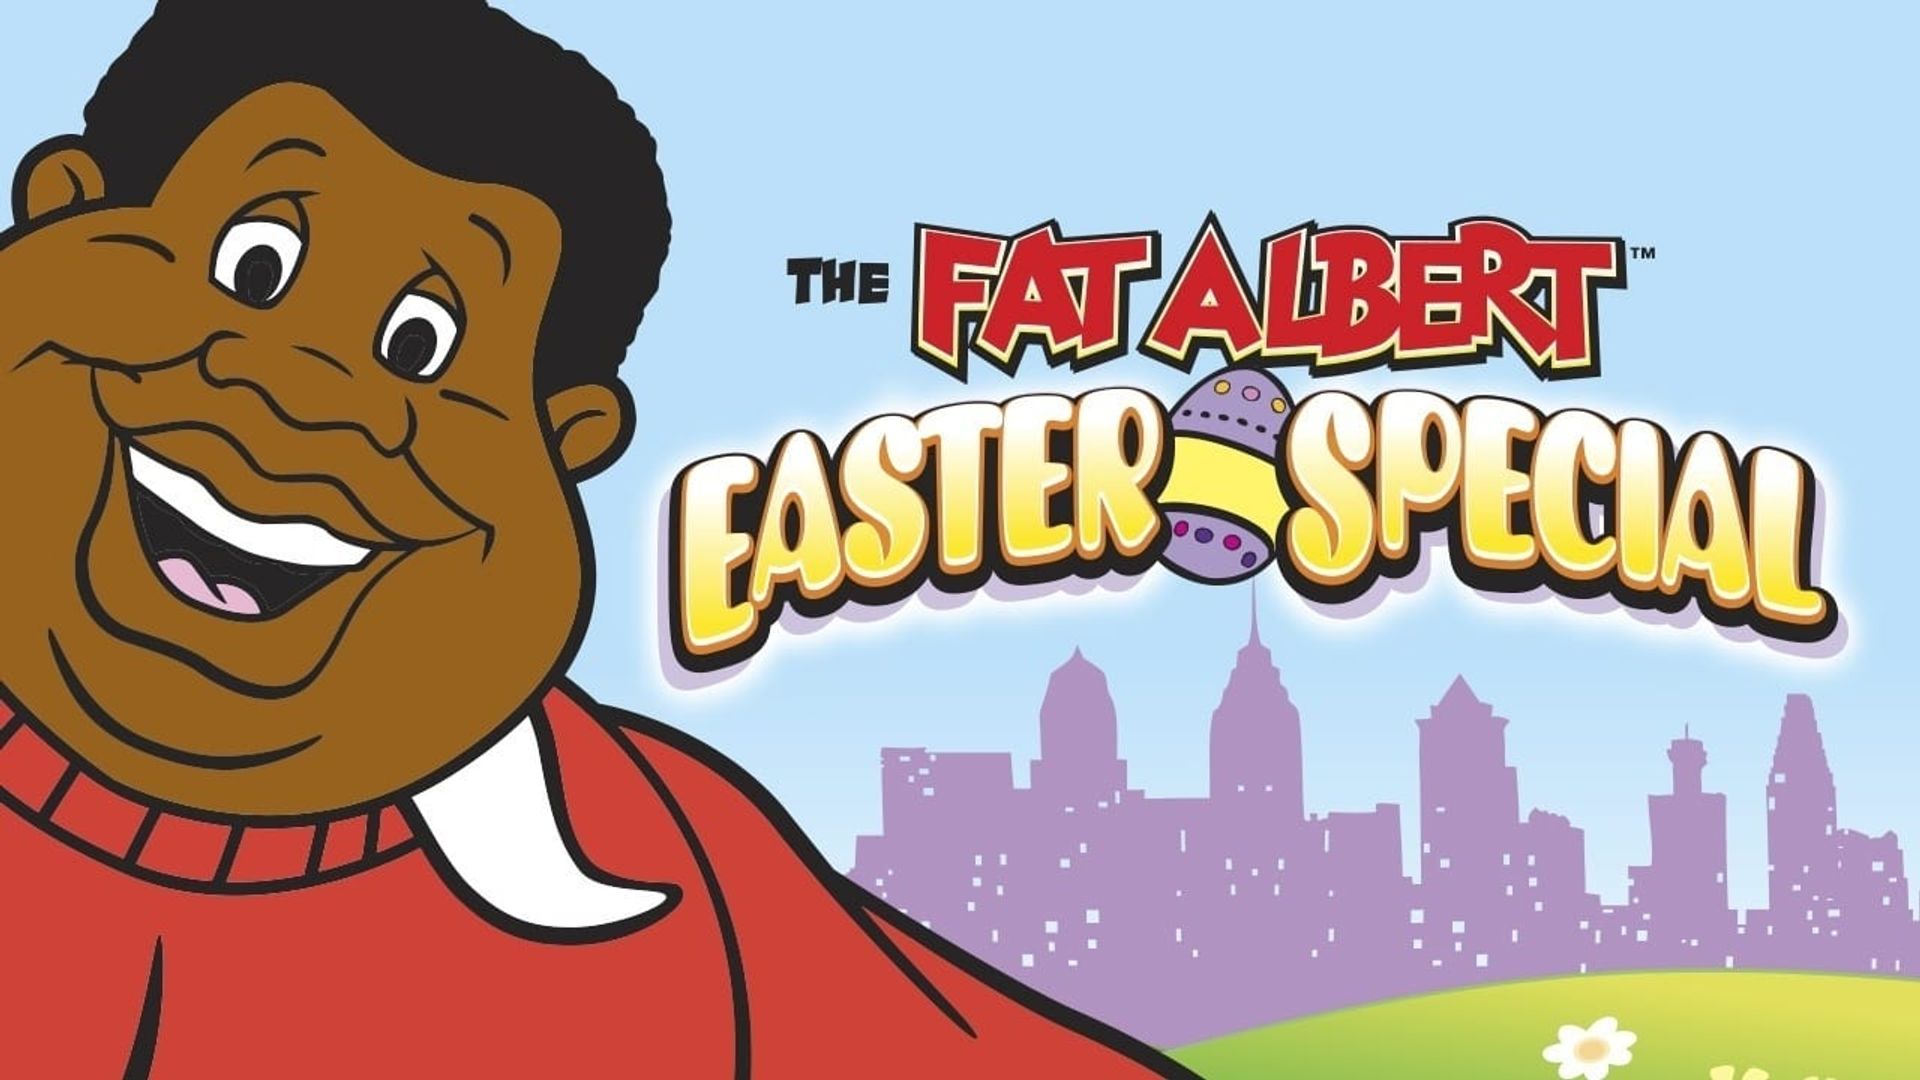 The Fat Albert Easter Special background